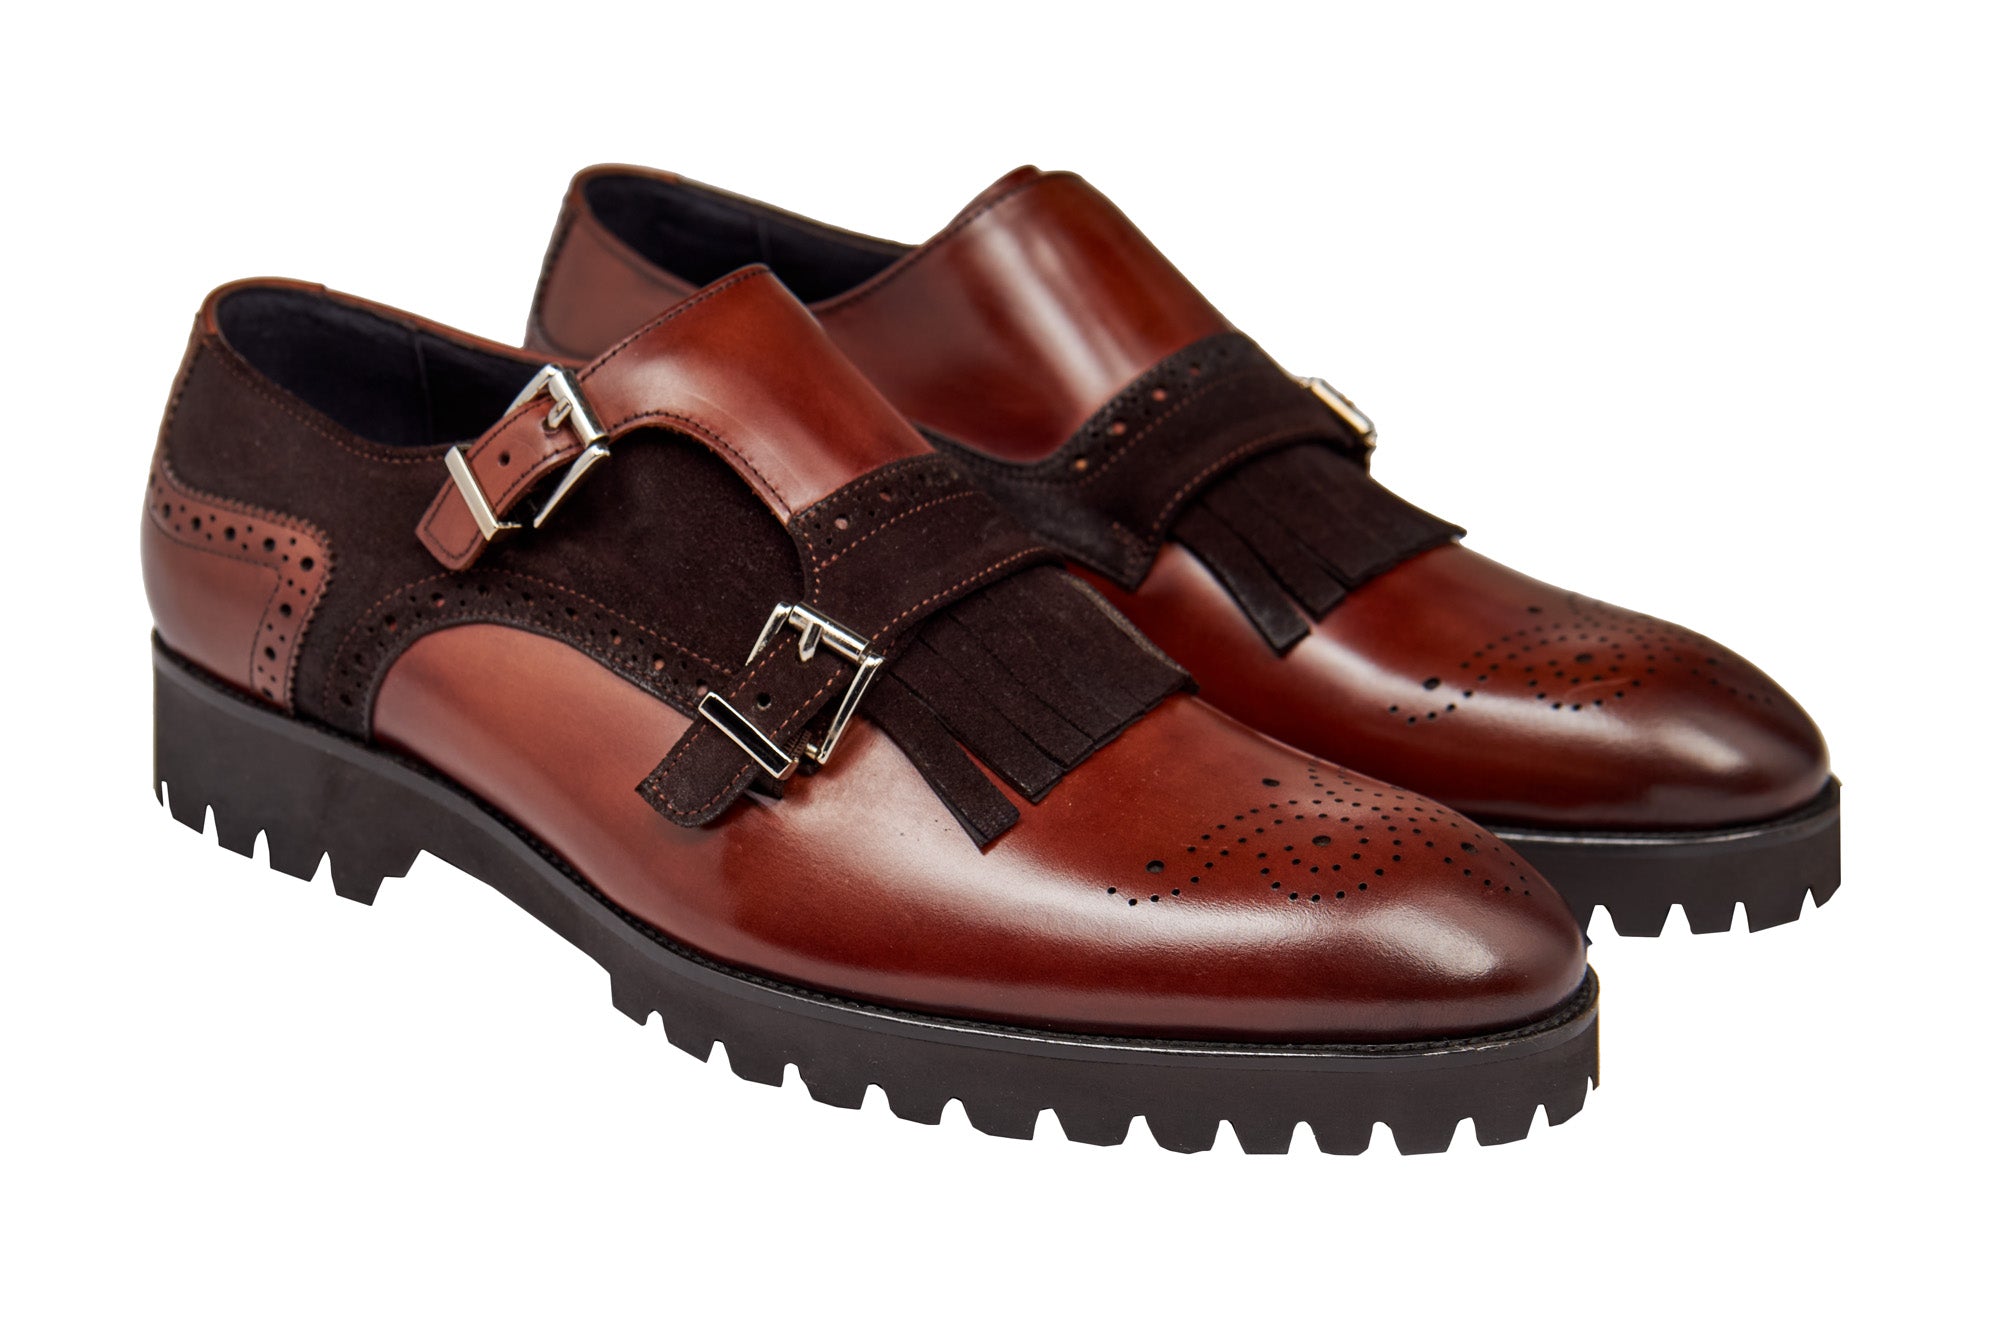 BROWN LEATHER & SUEDE DOUBLE MONK SHOES